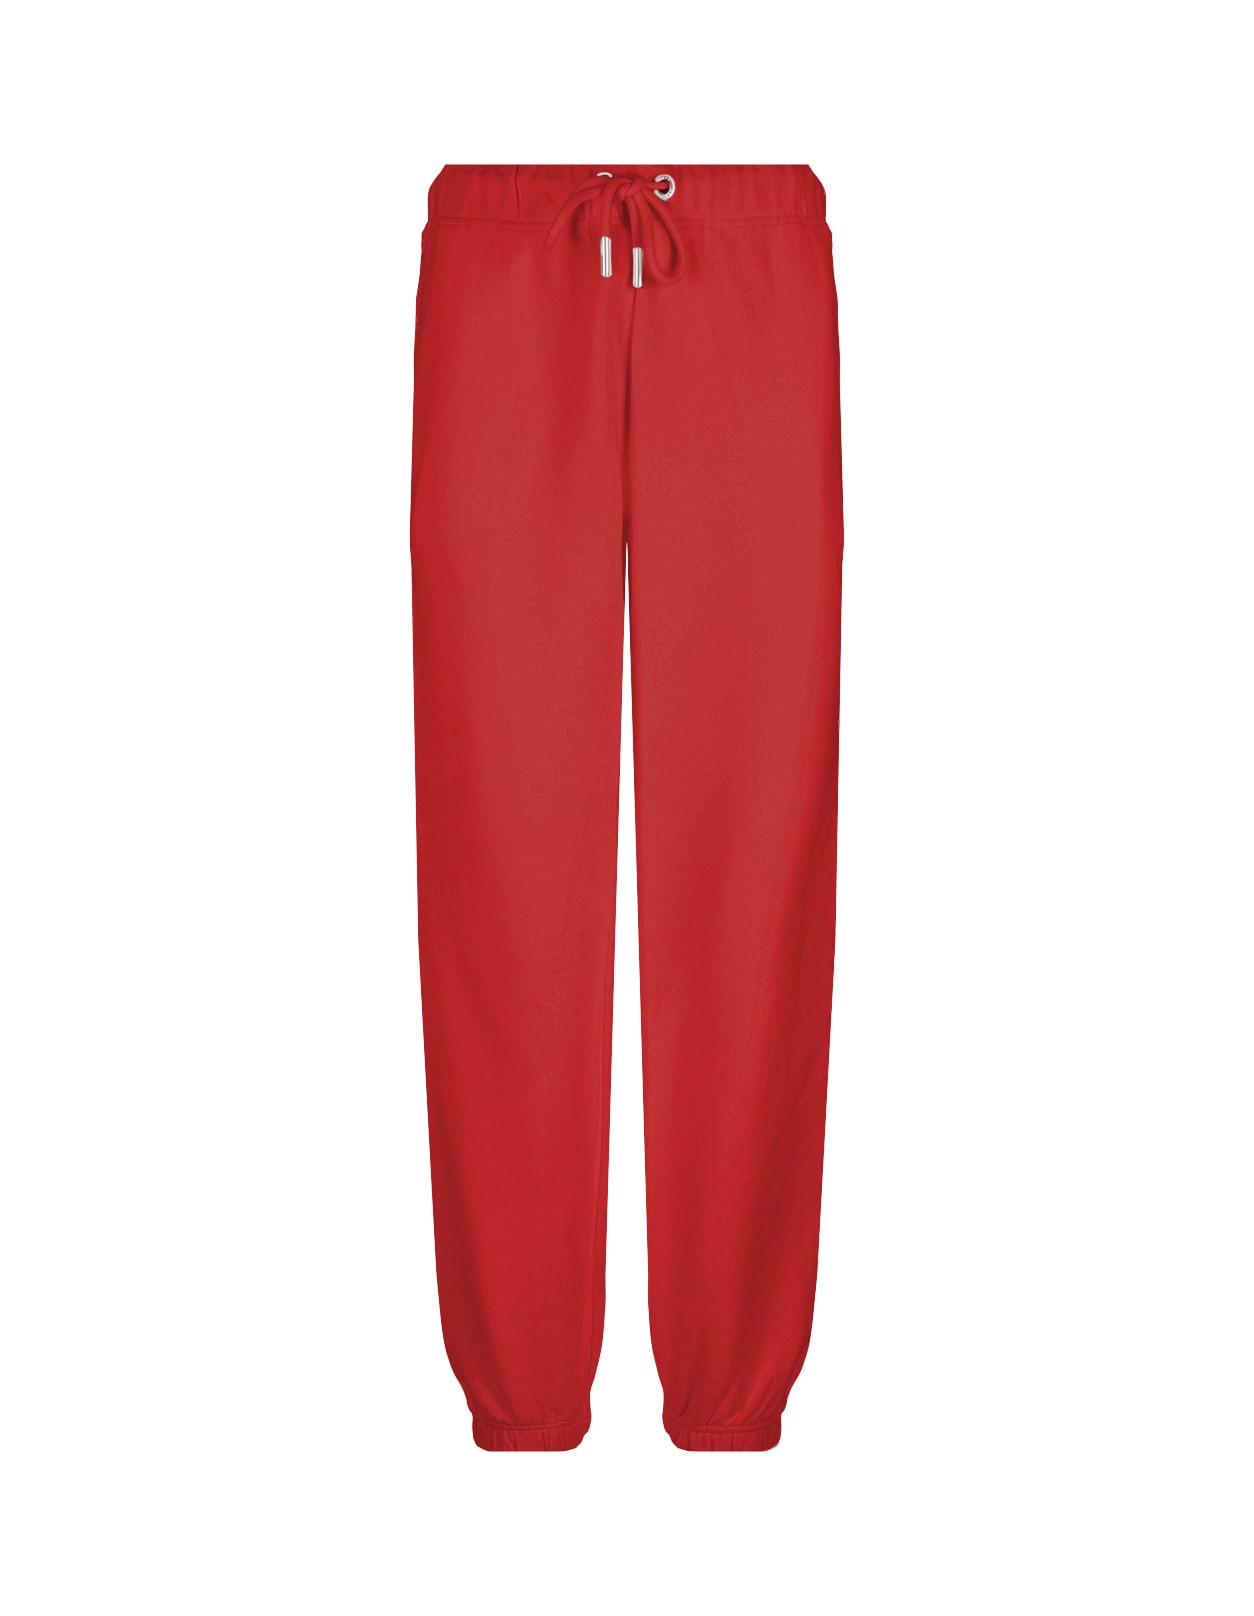 MONCLER RED COTTON JOGGERS